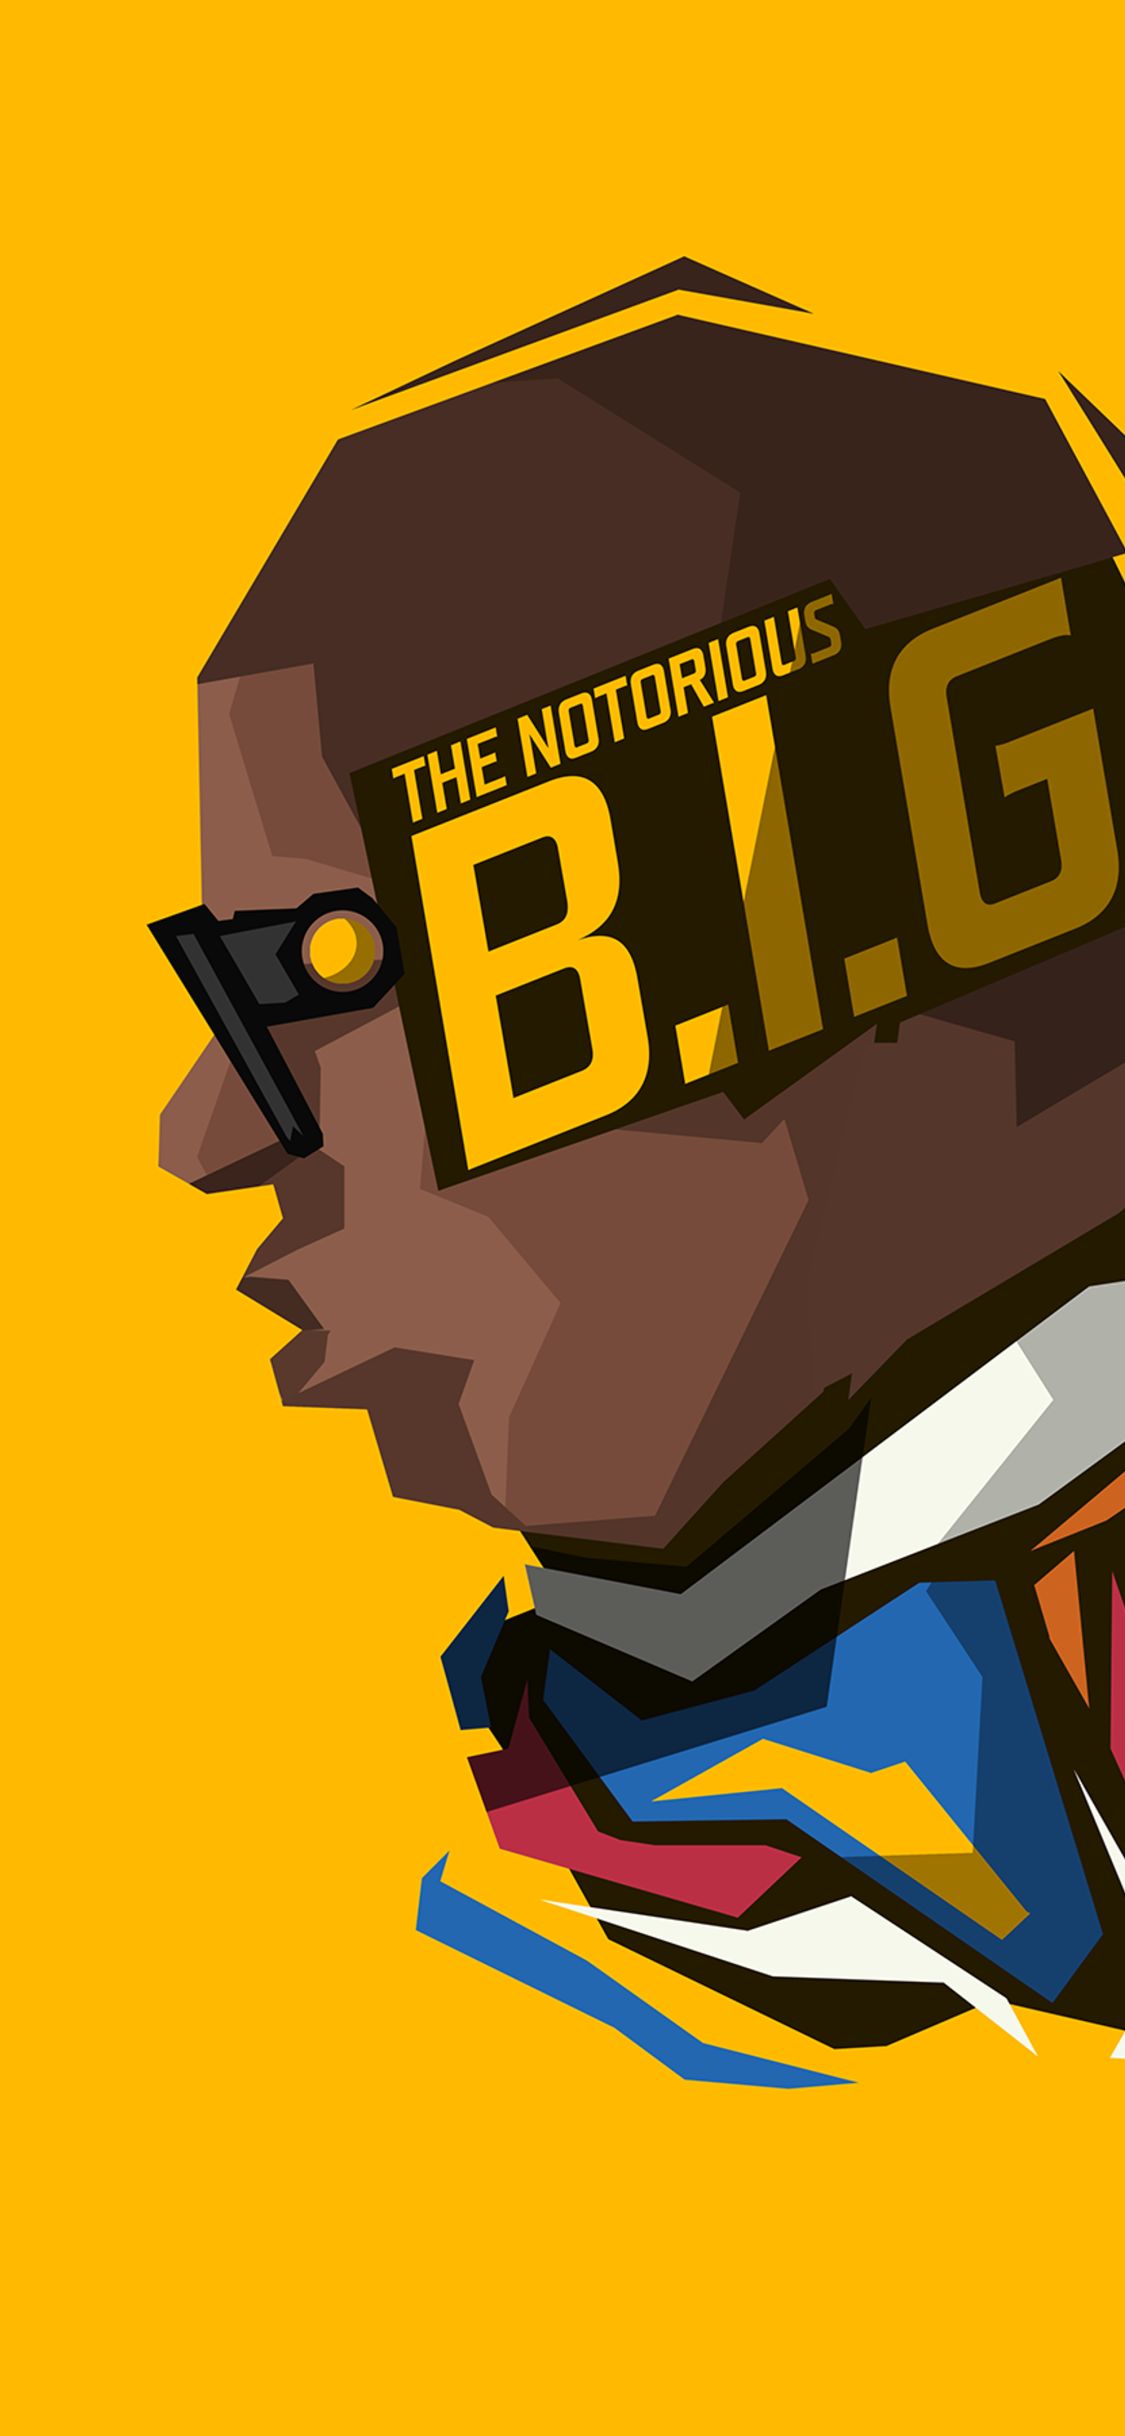 music, the notorious b i g